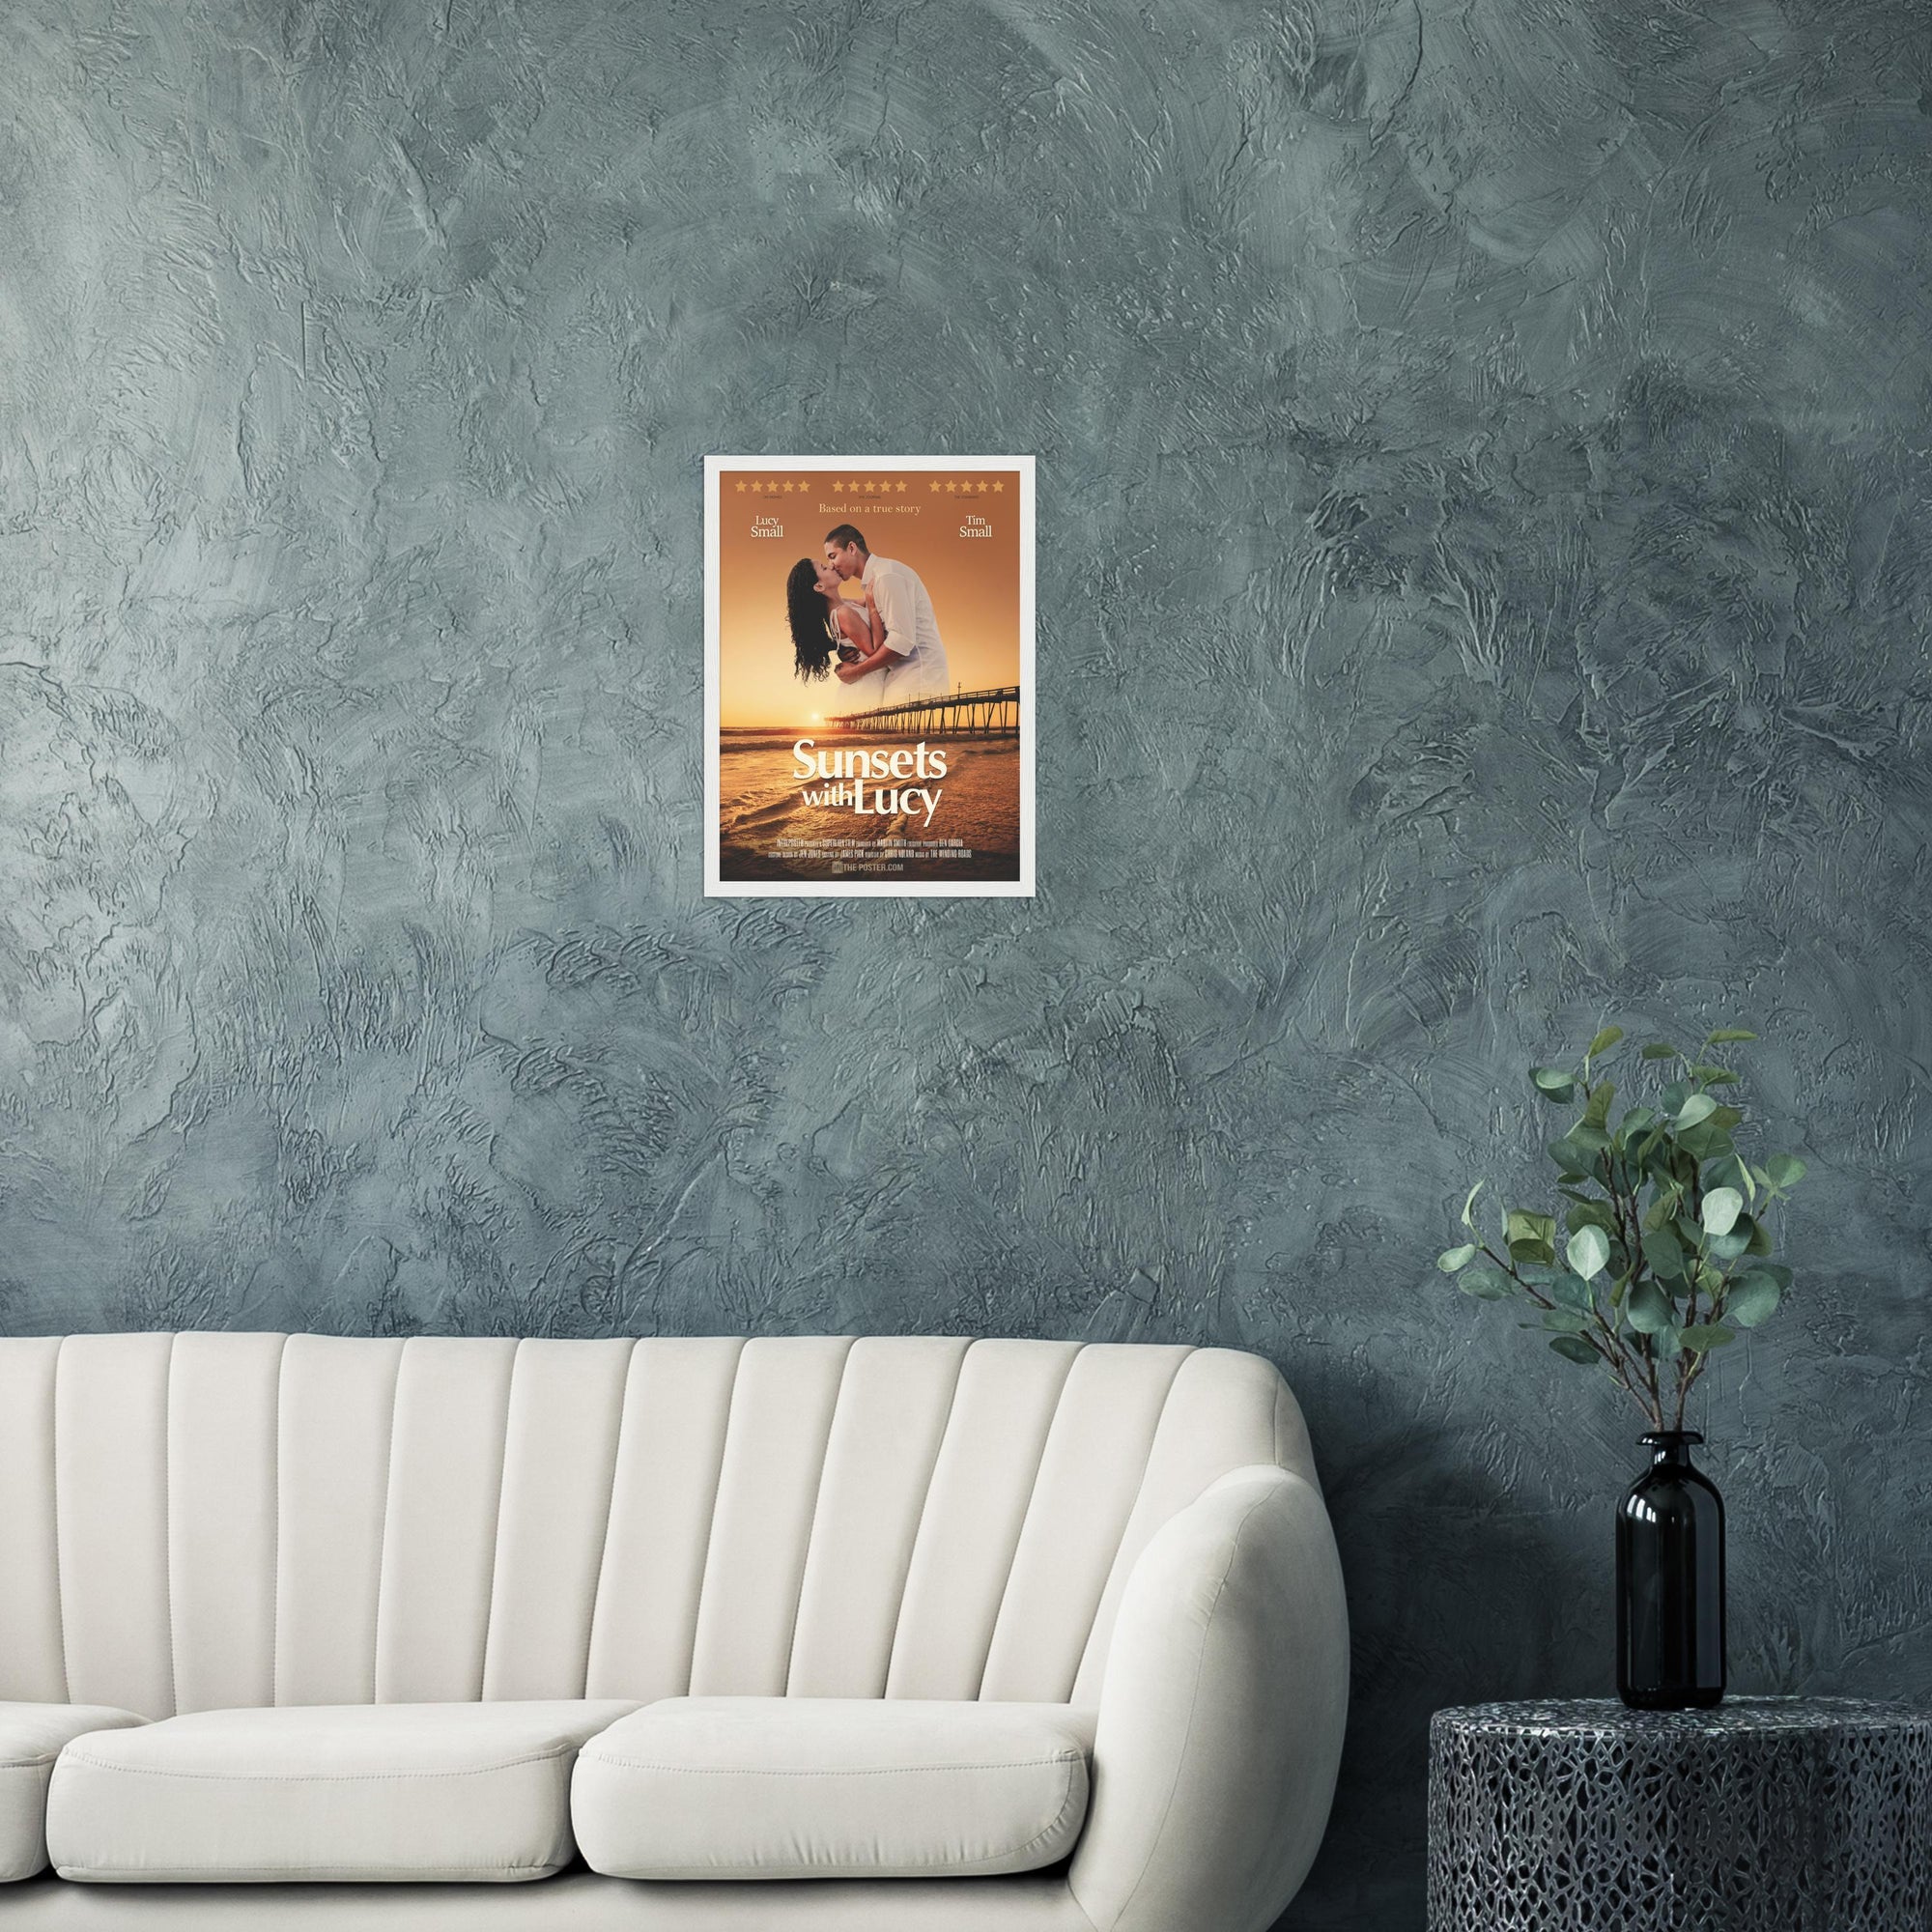 A custom movie poster in a small white frame on the wall above a cream sofa